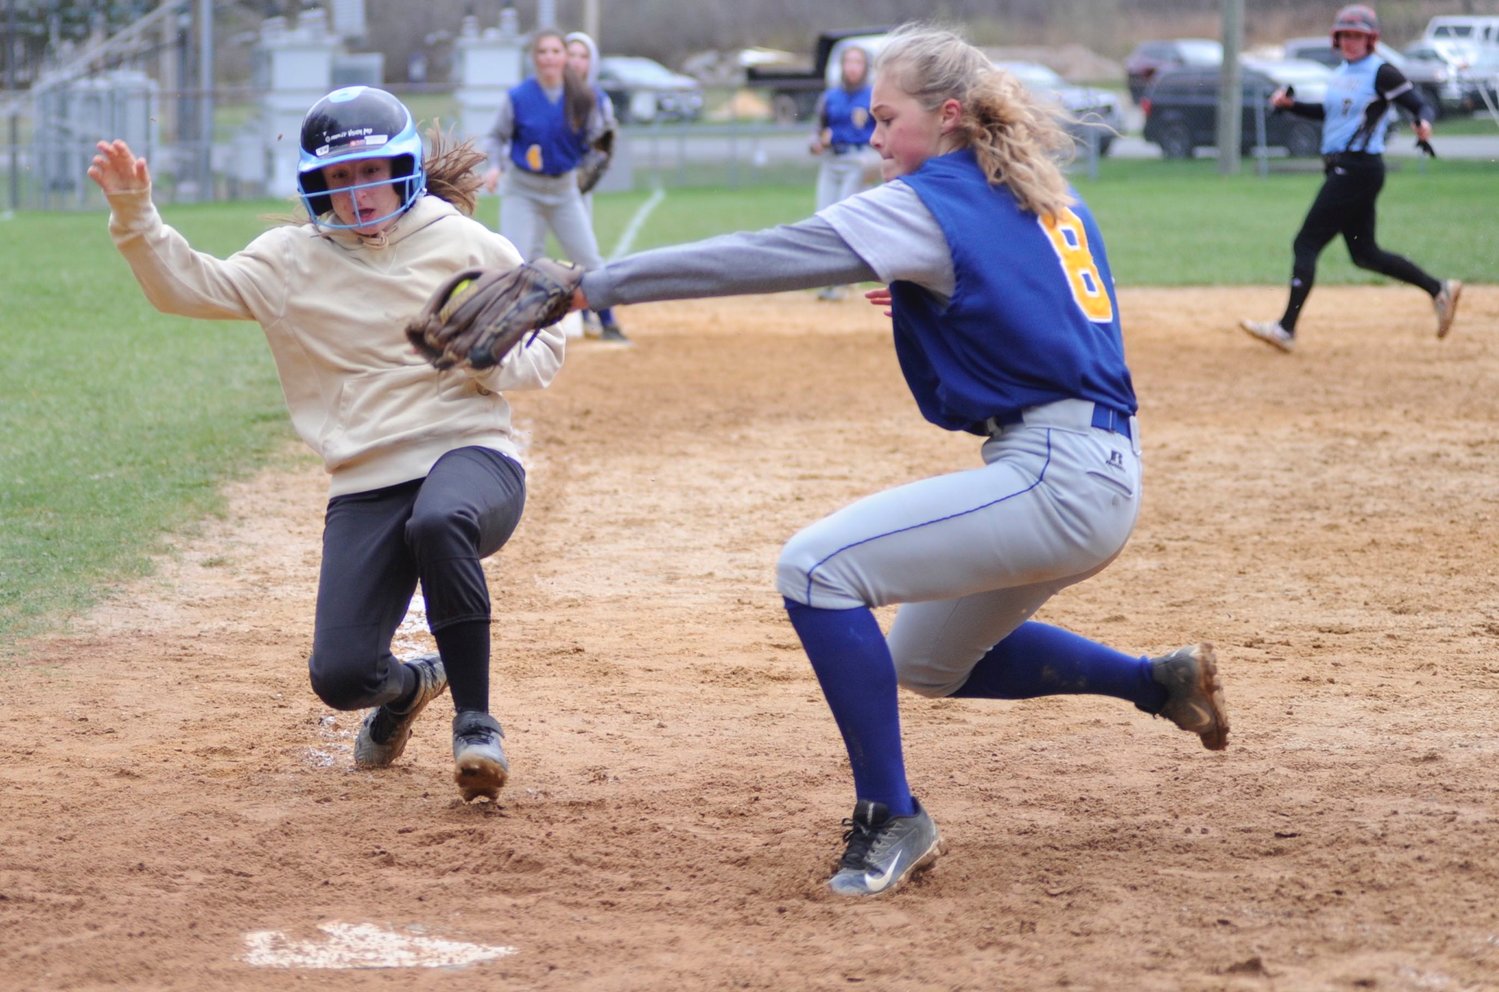 Sullivan West’s Kaylee DiBiase slides into home at the bottom of the seventh inning to win the game 10-9, just beating the tag by Chapel Field hurler Emma Spanjer.